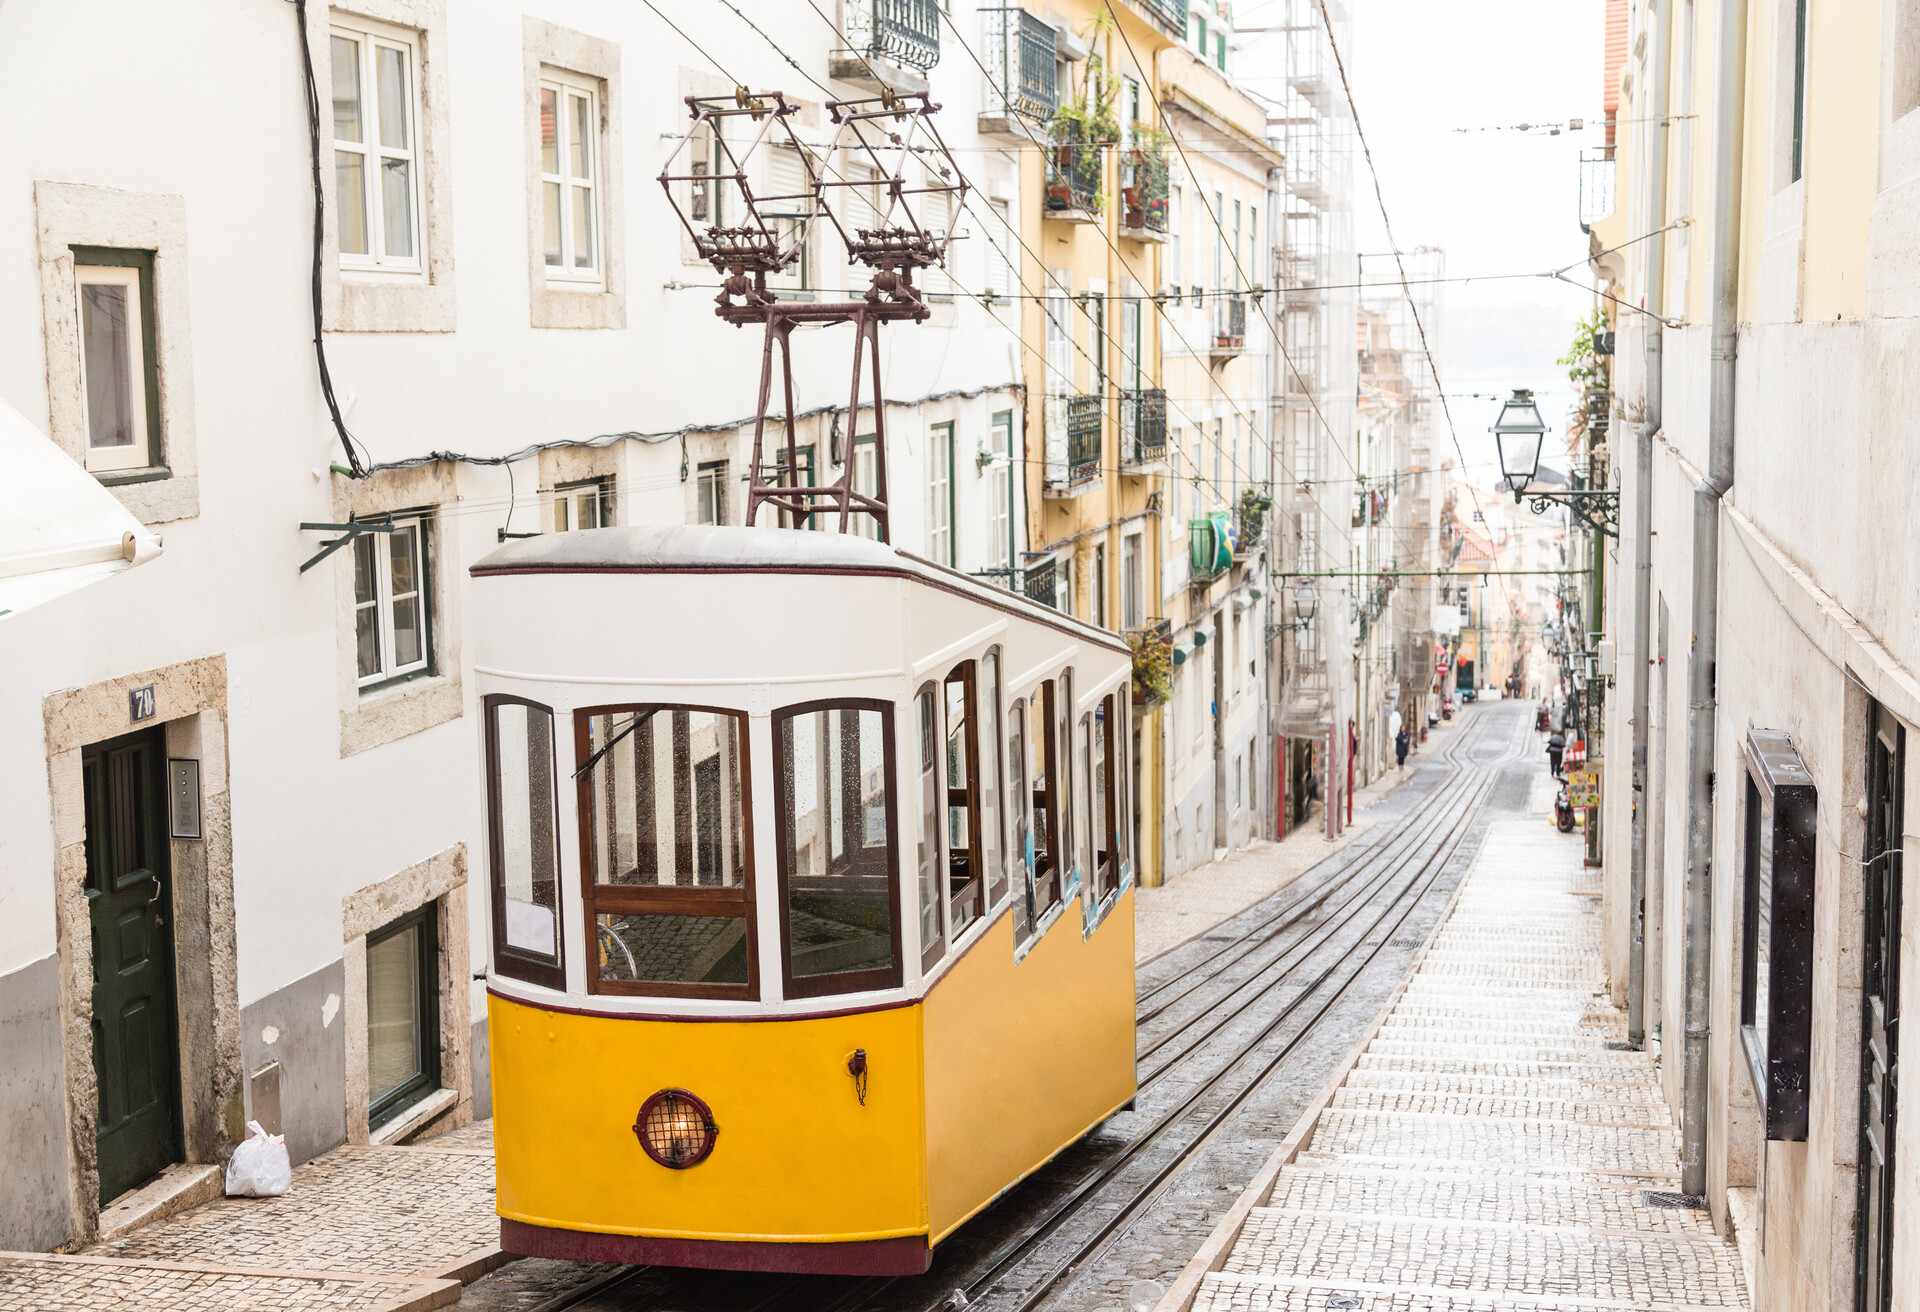 Typical yellow old tram funicular Elevador da Bica in Bairro Alto, going up hill in the old town of Lisbon